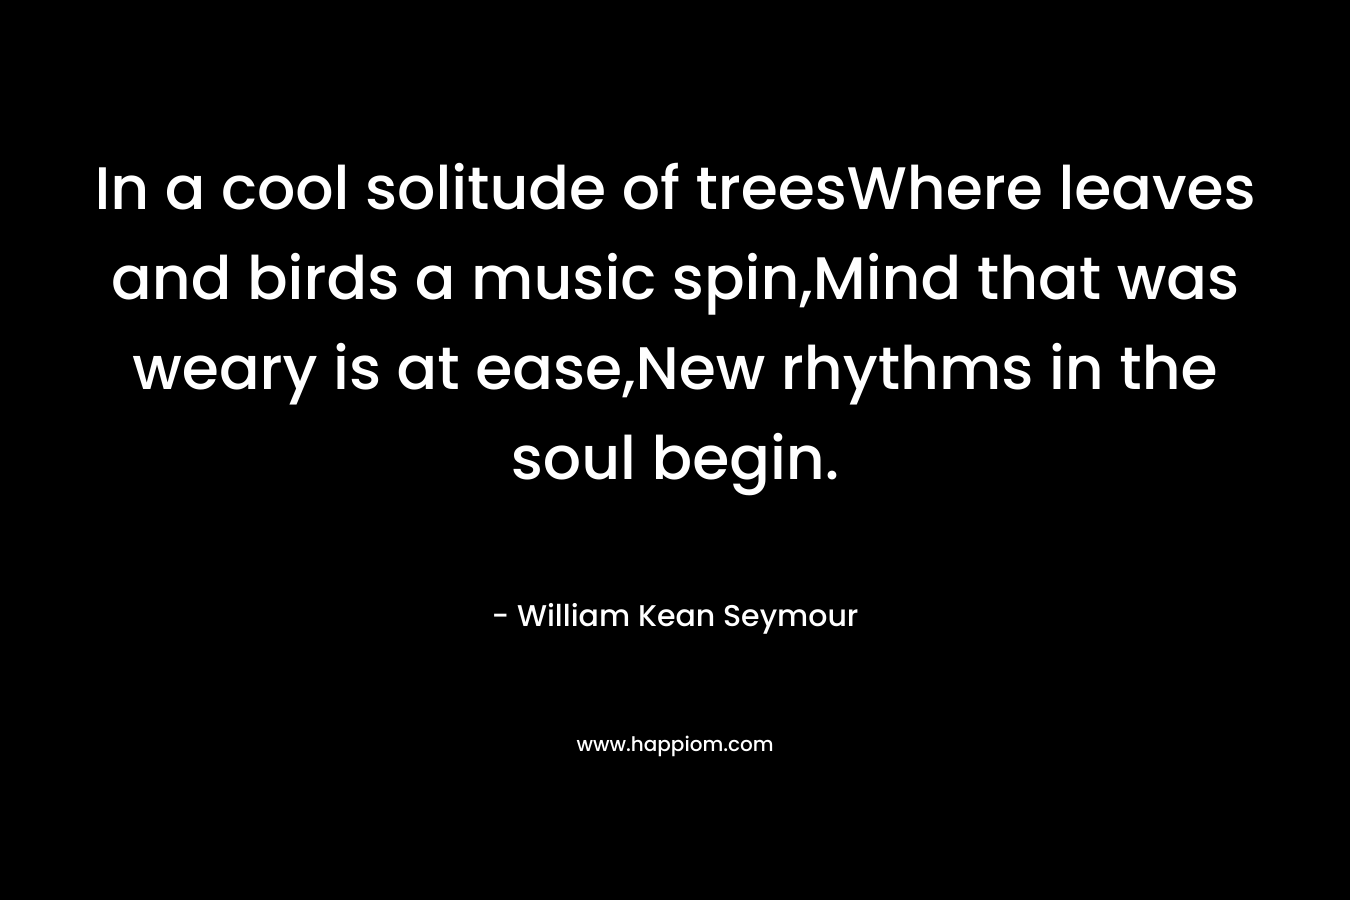 In a cool solitude of treesWhere leaves and birds a music spin,Mind that was weary is at ease,New rhythms in the soul begin. – William Kean Seymour